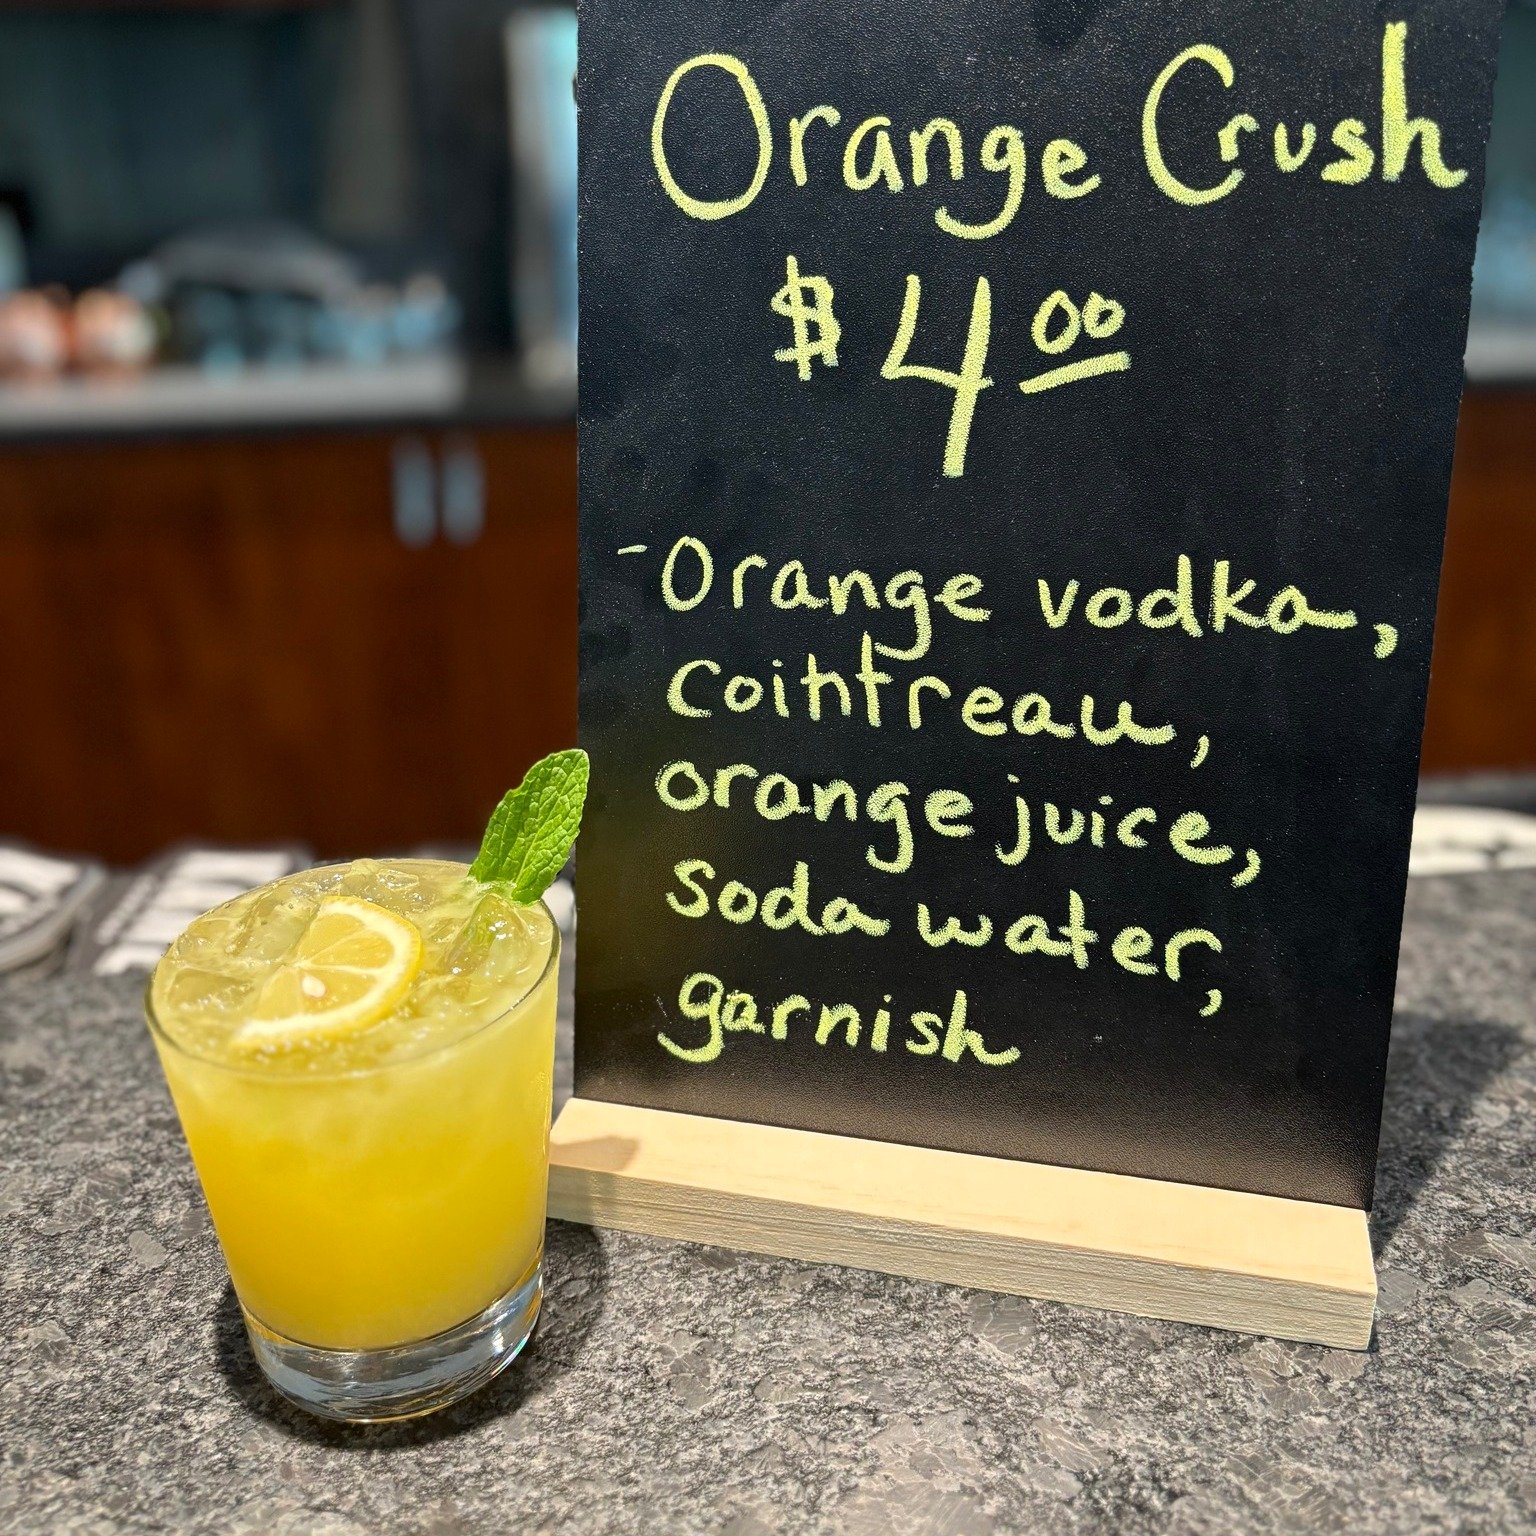 🍊Kristen is shaking up some drink specials! 🍊

🍺Plus check out beer bucket specials at the bar🍺

💐Pleas note: Sunday 5/12/2024 we will be open 9- 12 pm because we all love our Moms too much and/ or we are Moms! 

⏰Business Hours:
Thursday to Sat